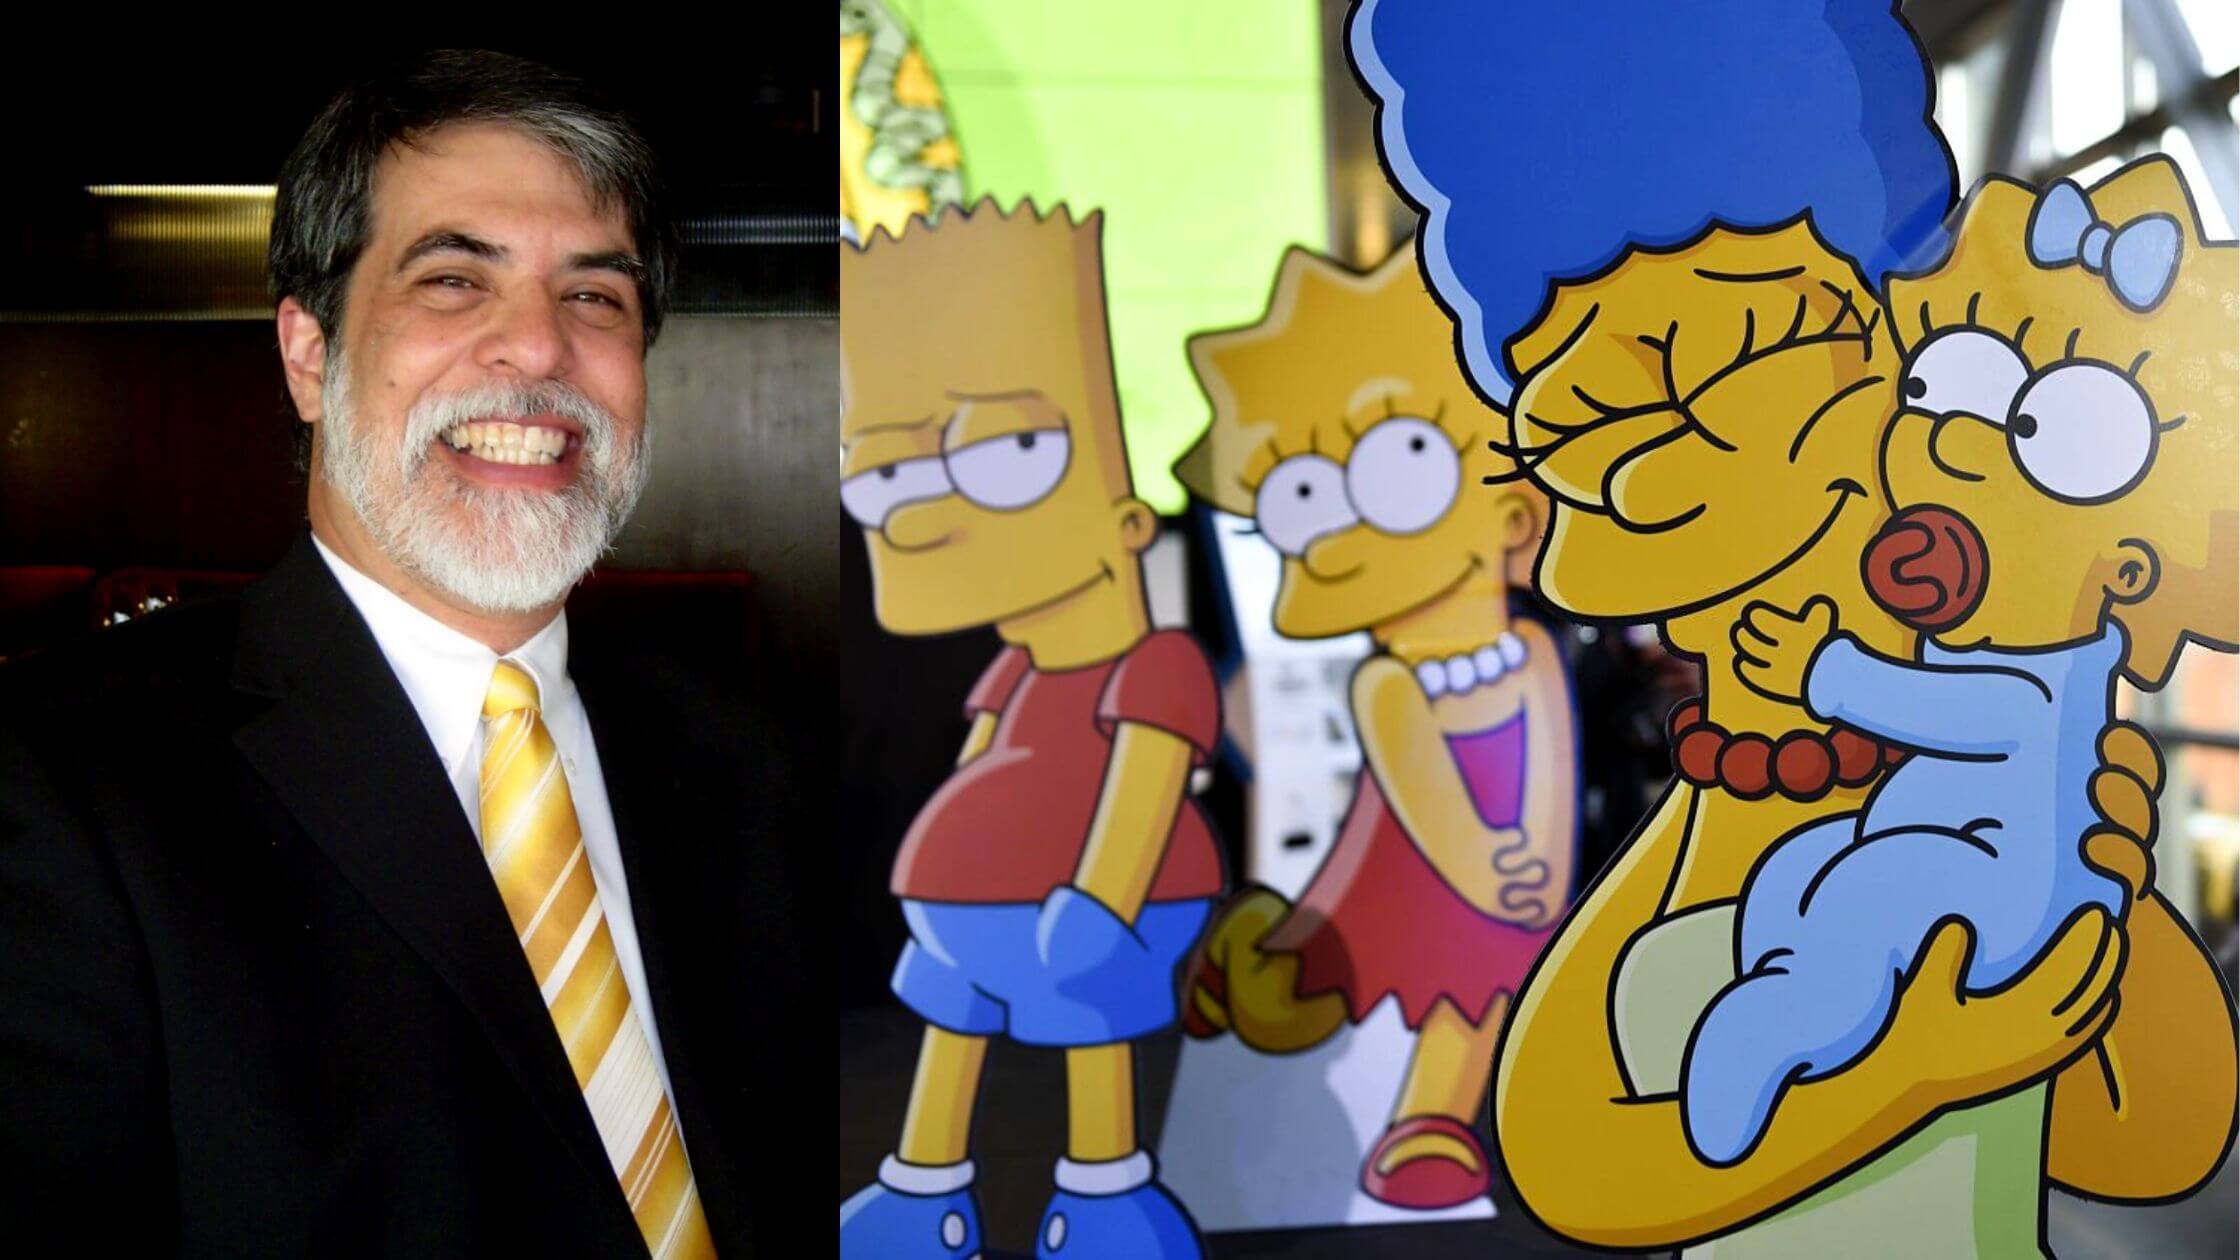 Chris Ledesma Passes Away After 33 Years Of Production Work In 'The Simpsons'